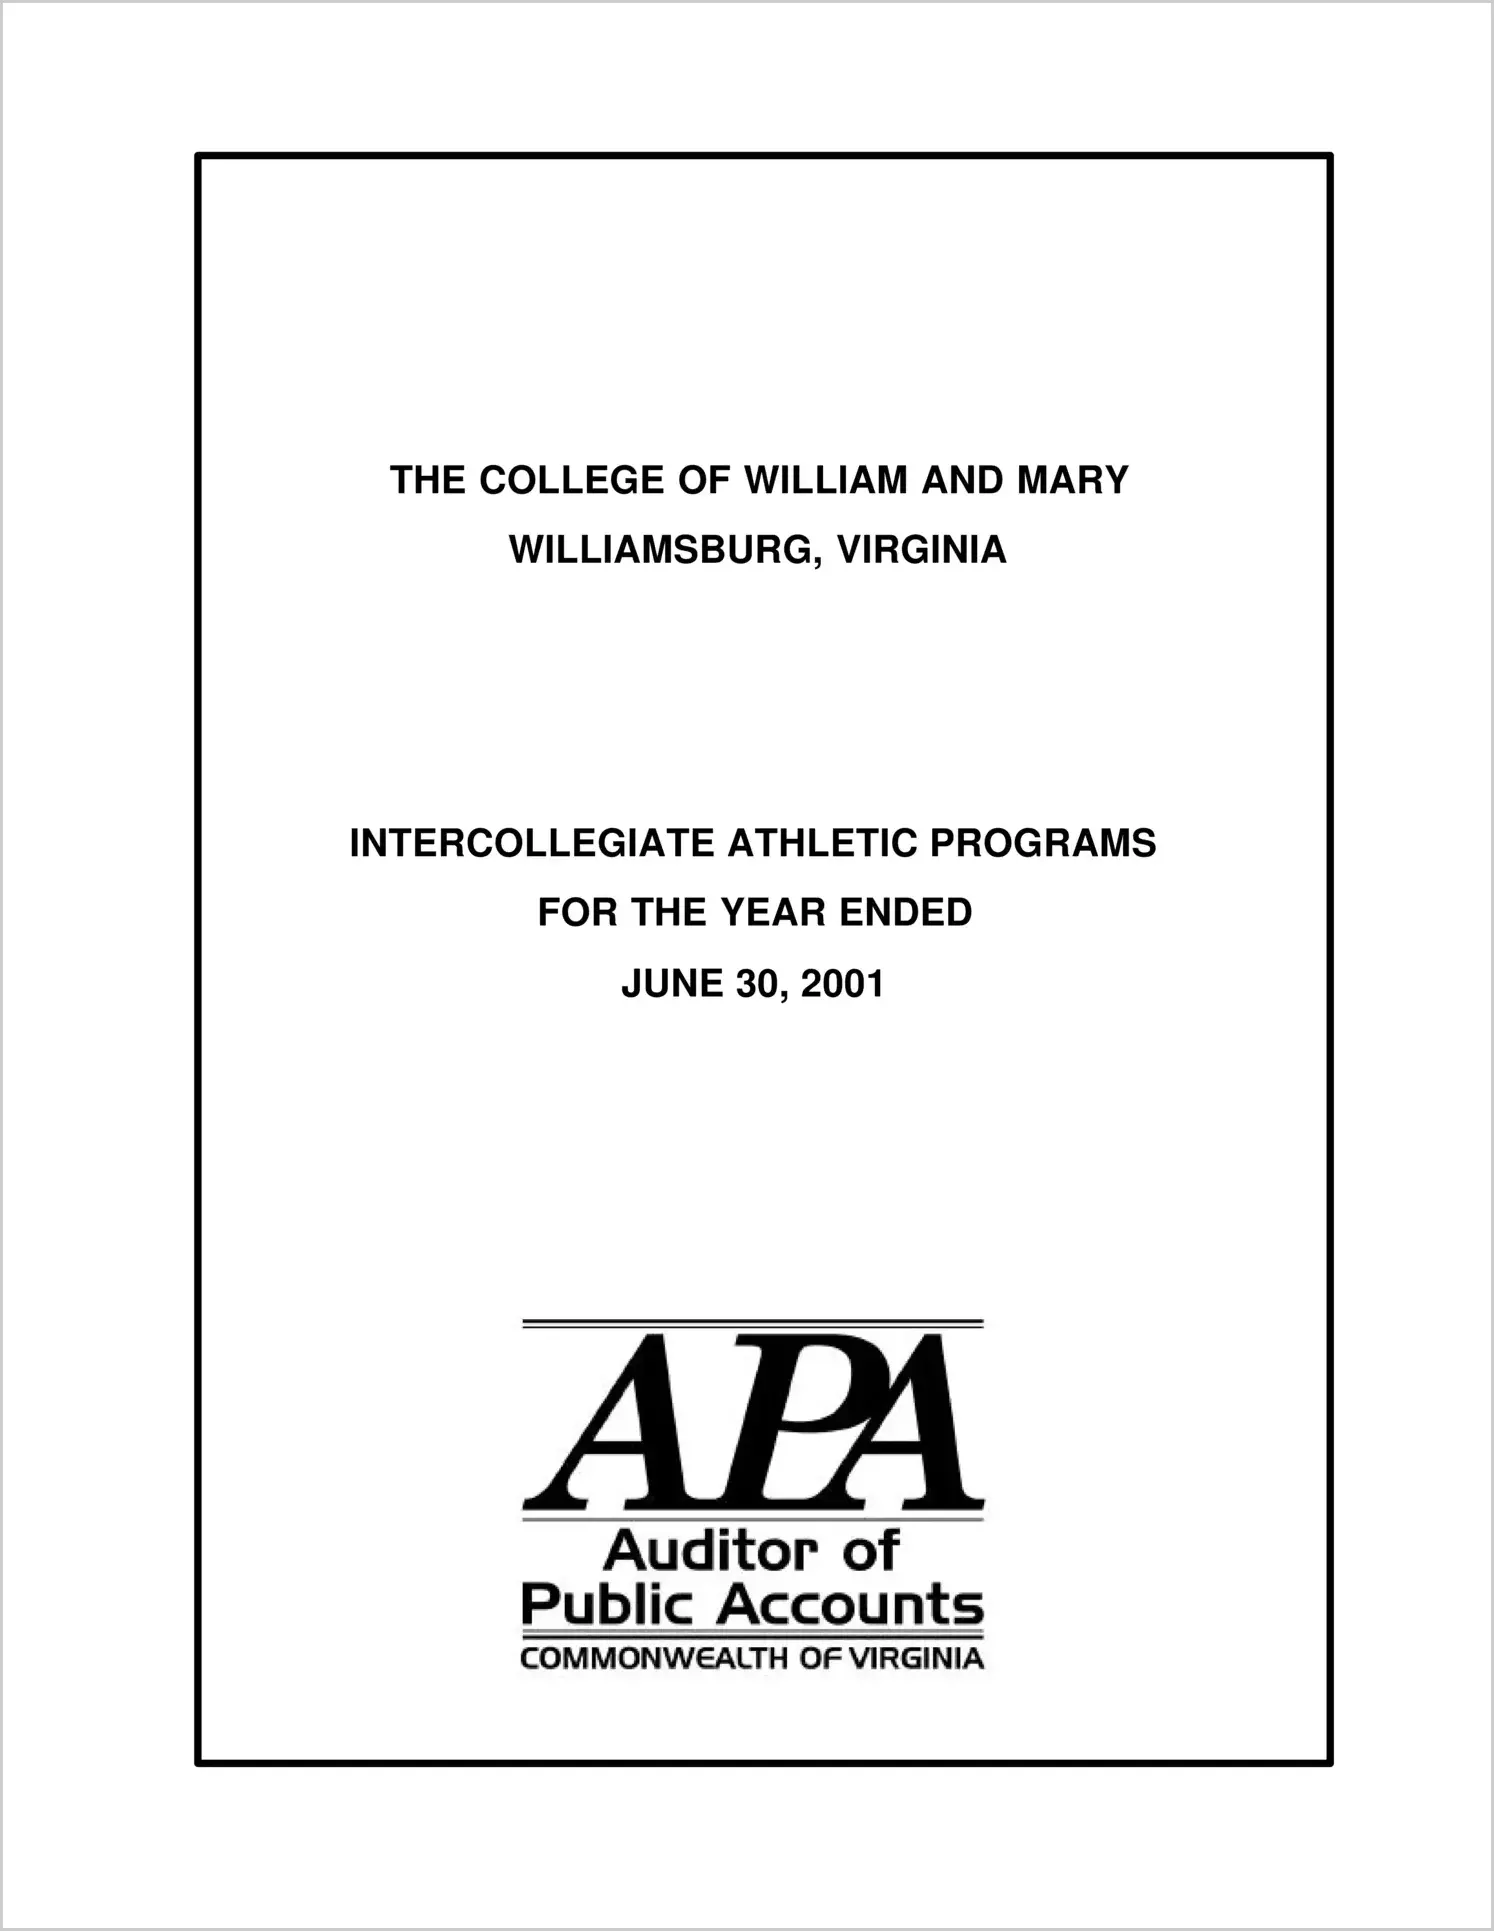 The College of William and Mary Intercollegiate Athletic Programs for the year ended June 30, 2001